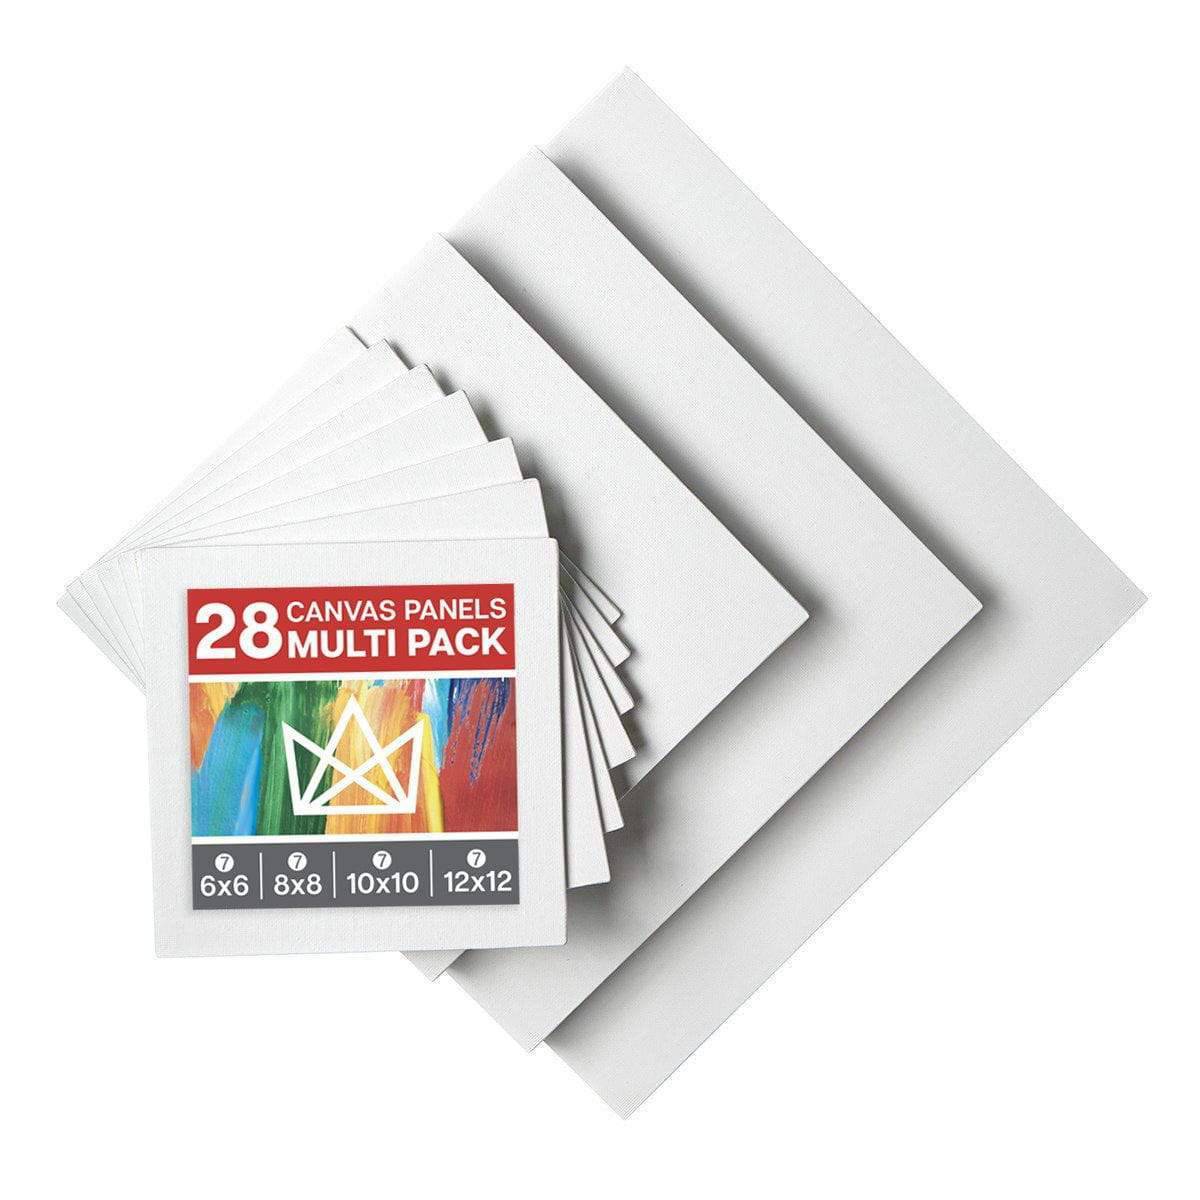 KINGART 802-8 White 11x14 Stretched Artist Canvas, Pack of 8, Gesso  Primed - 100% Cotton Rectangular Canvases, 5/8 Profile, Art Supplies for  Oil